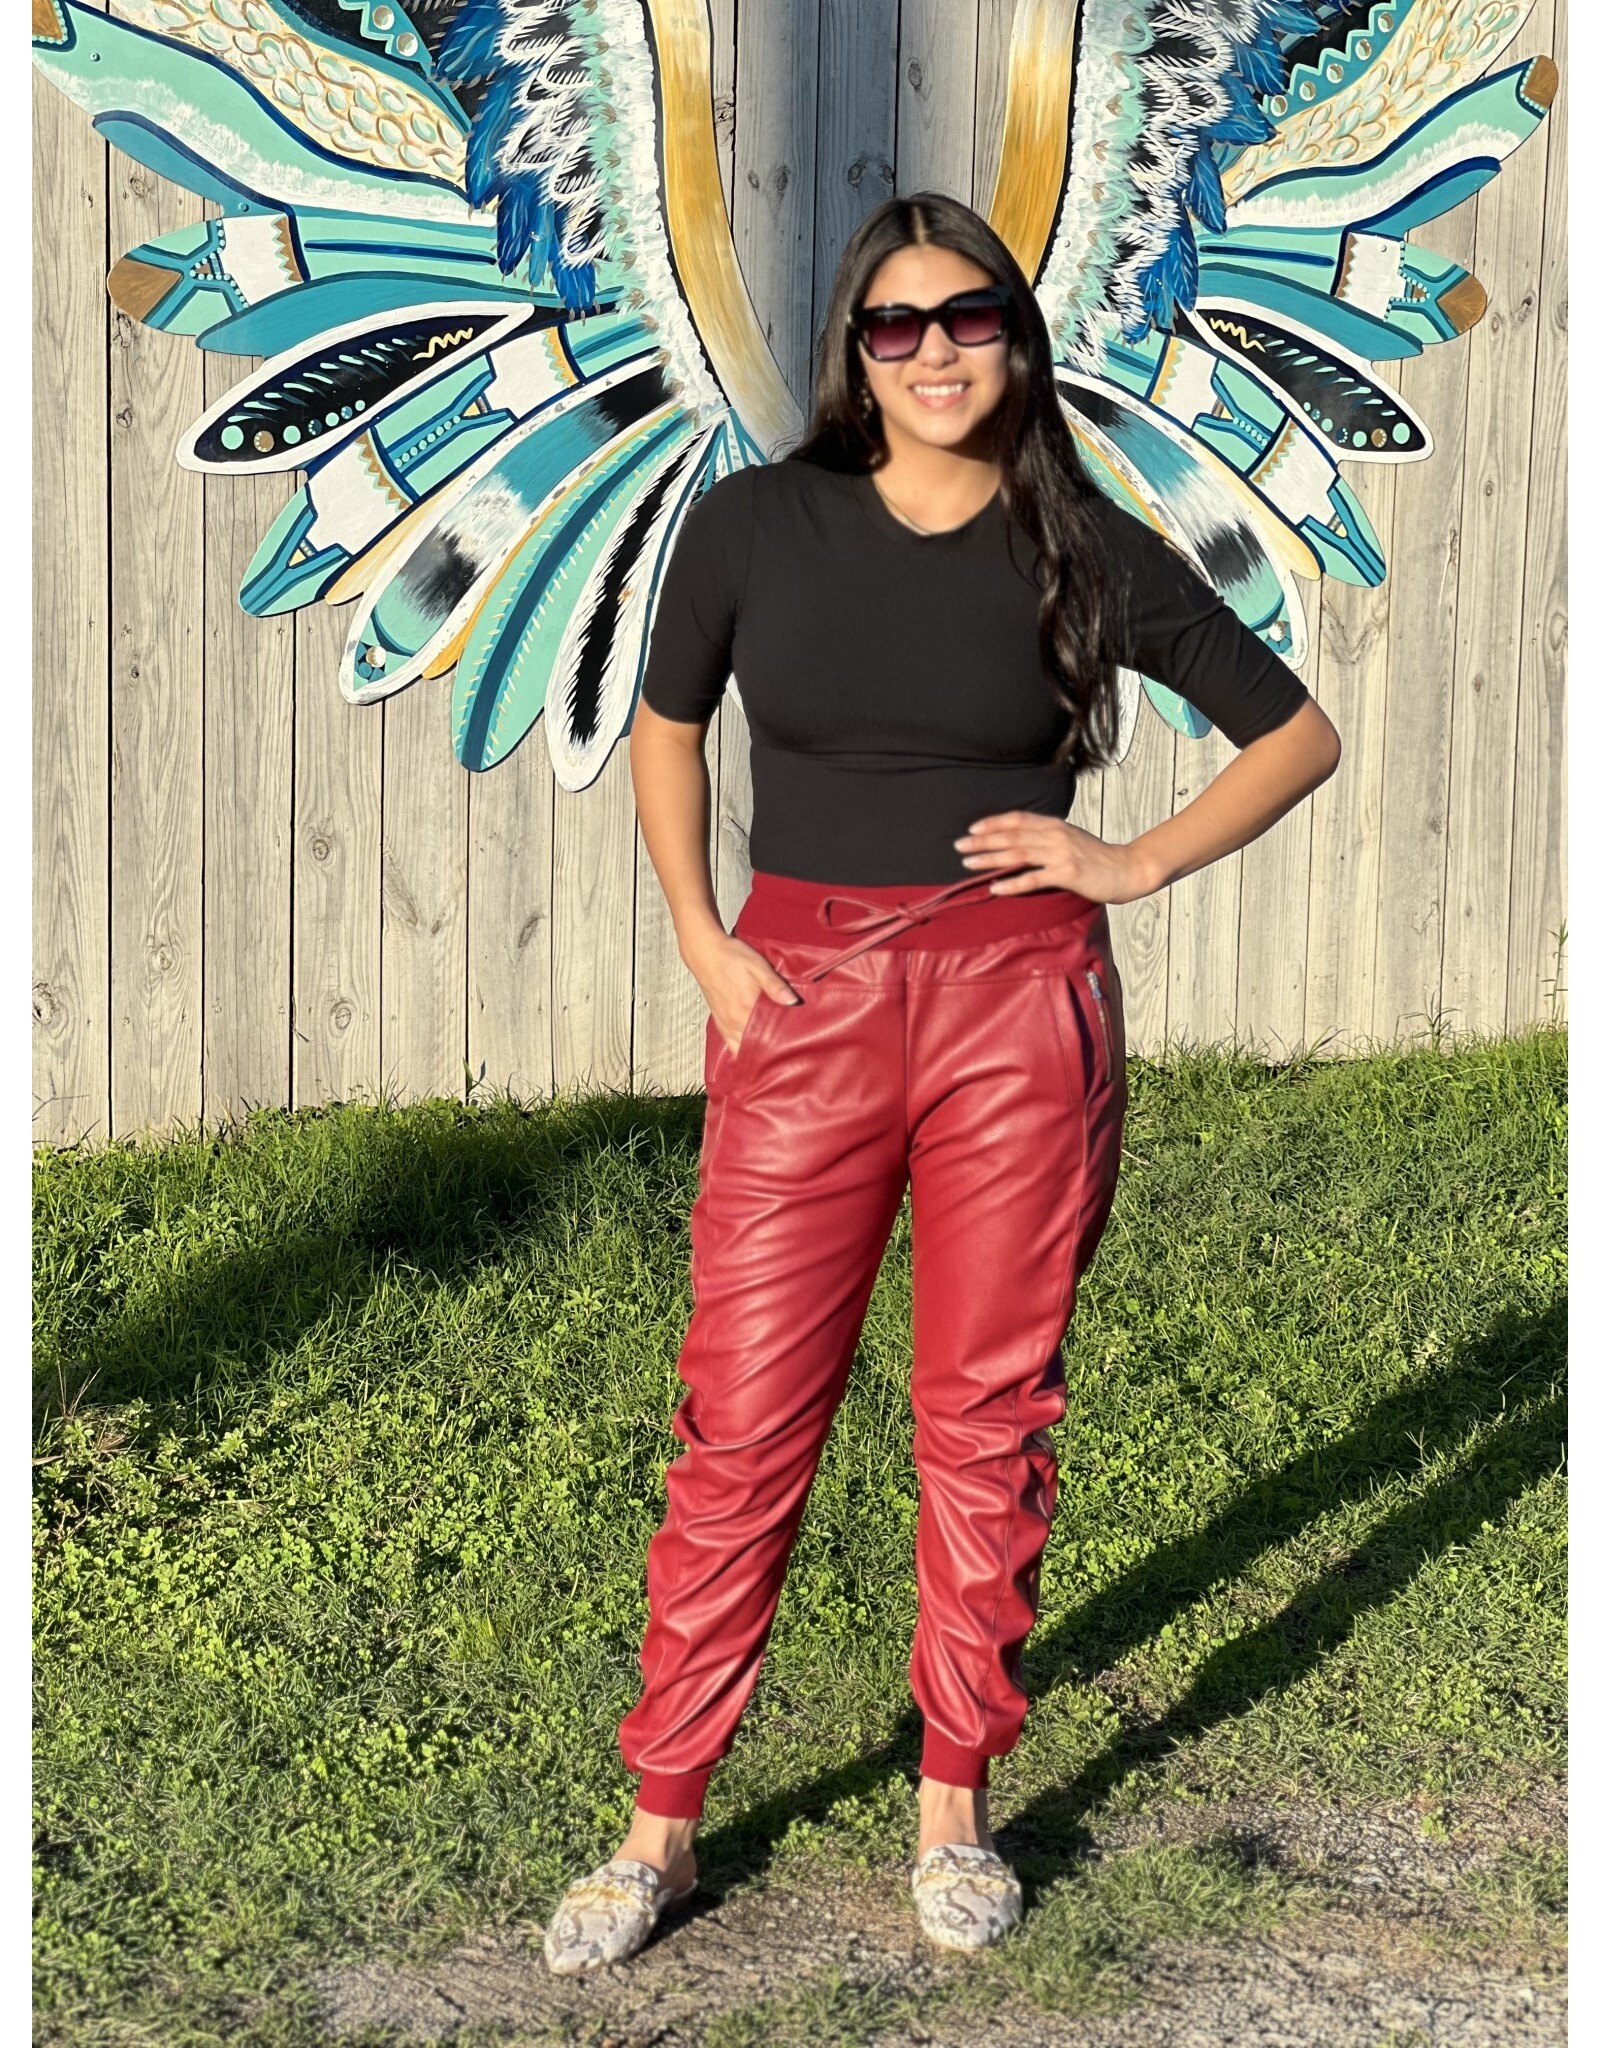 Deep Red Faux Leather Joggers - Rhinestone Angel